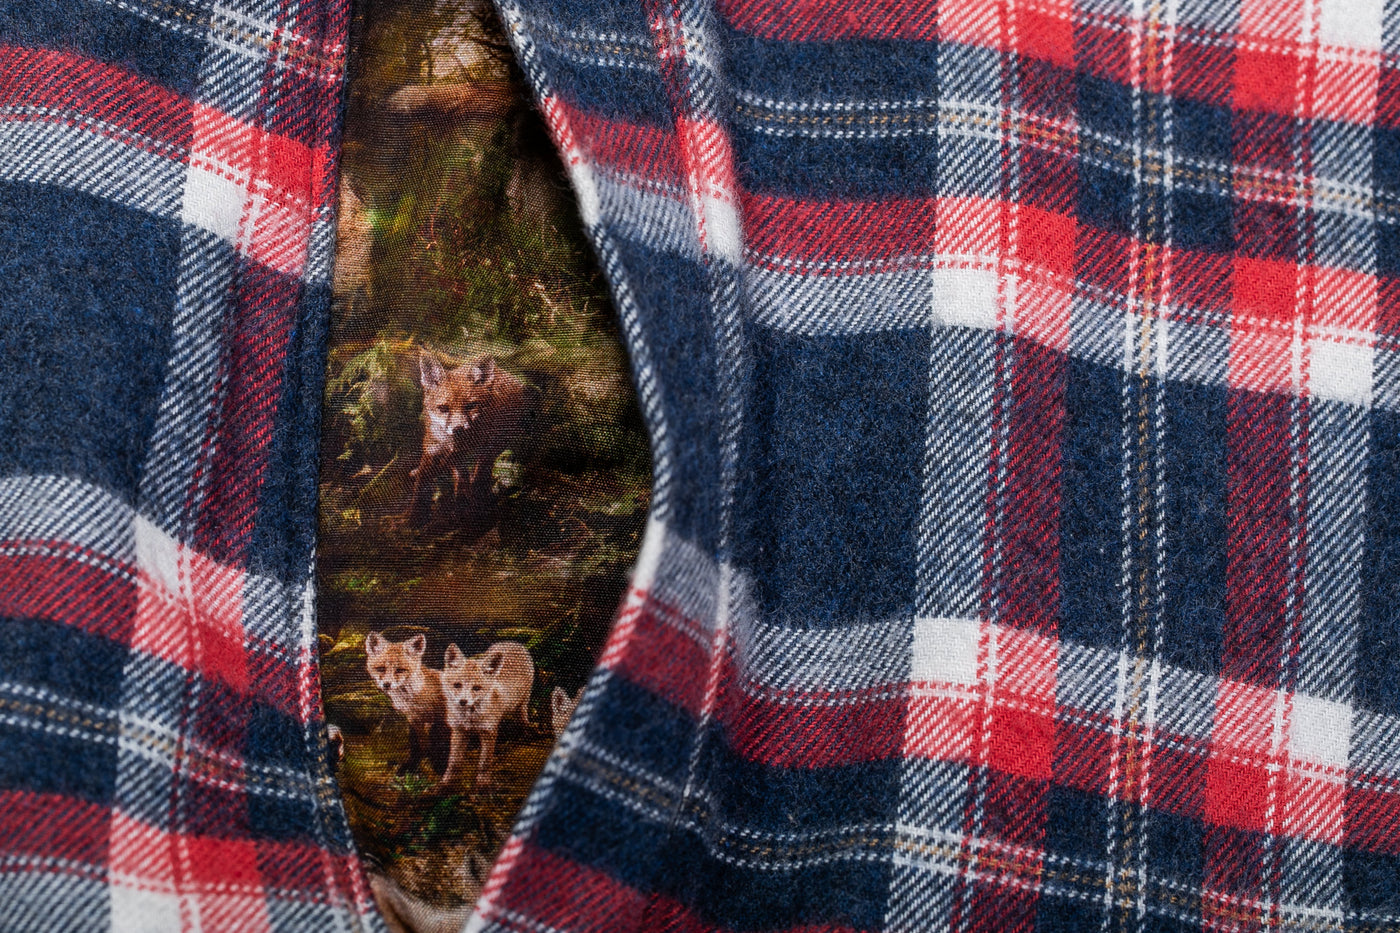 Women's Northwood Sherpa Insulated Flannel Jacket- Eagle Blue